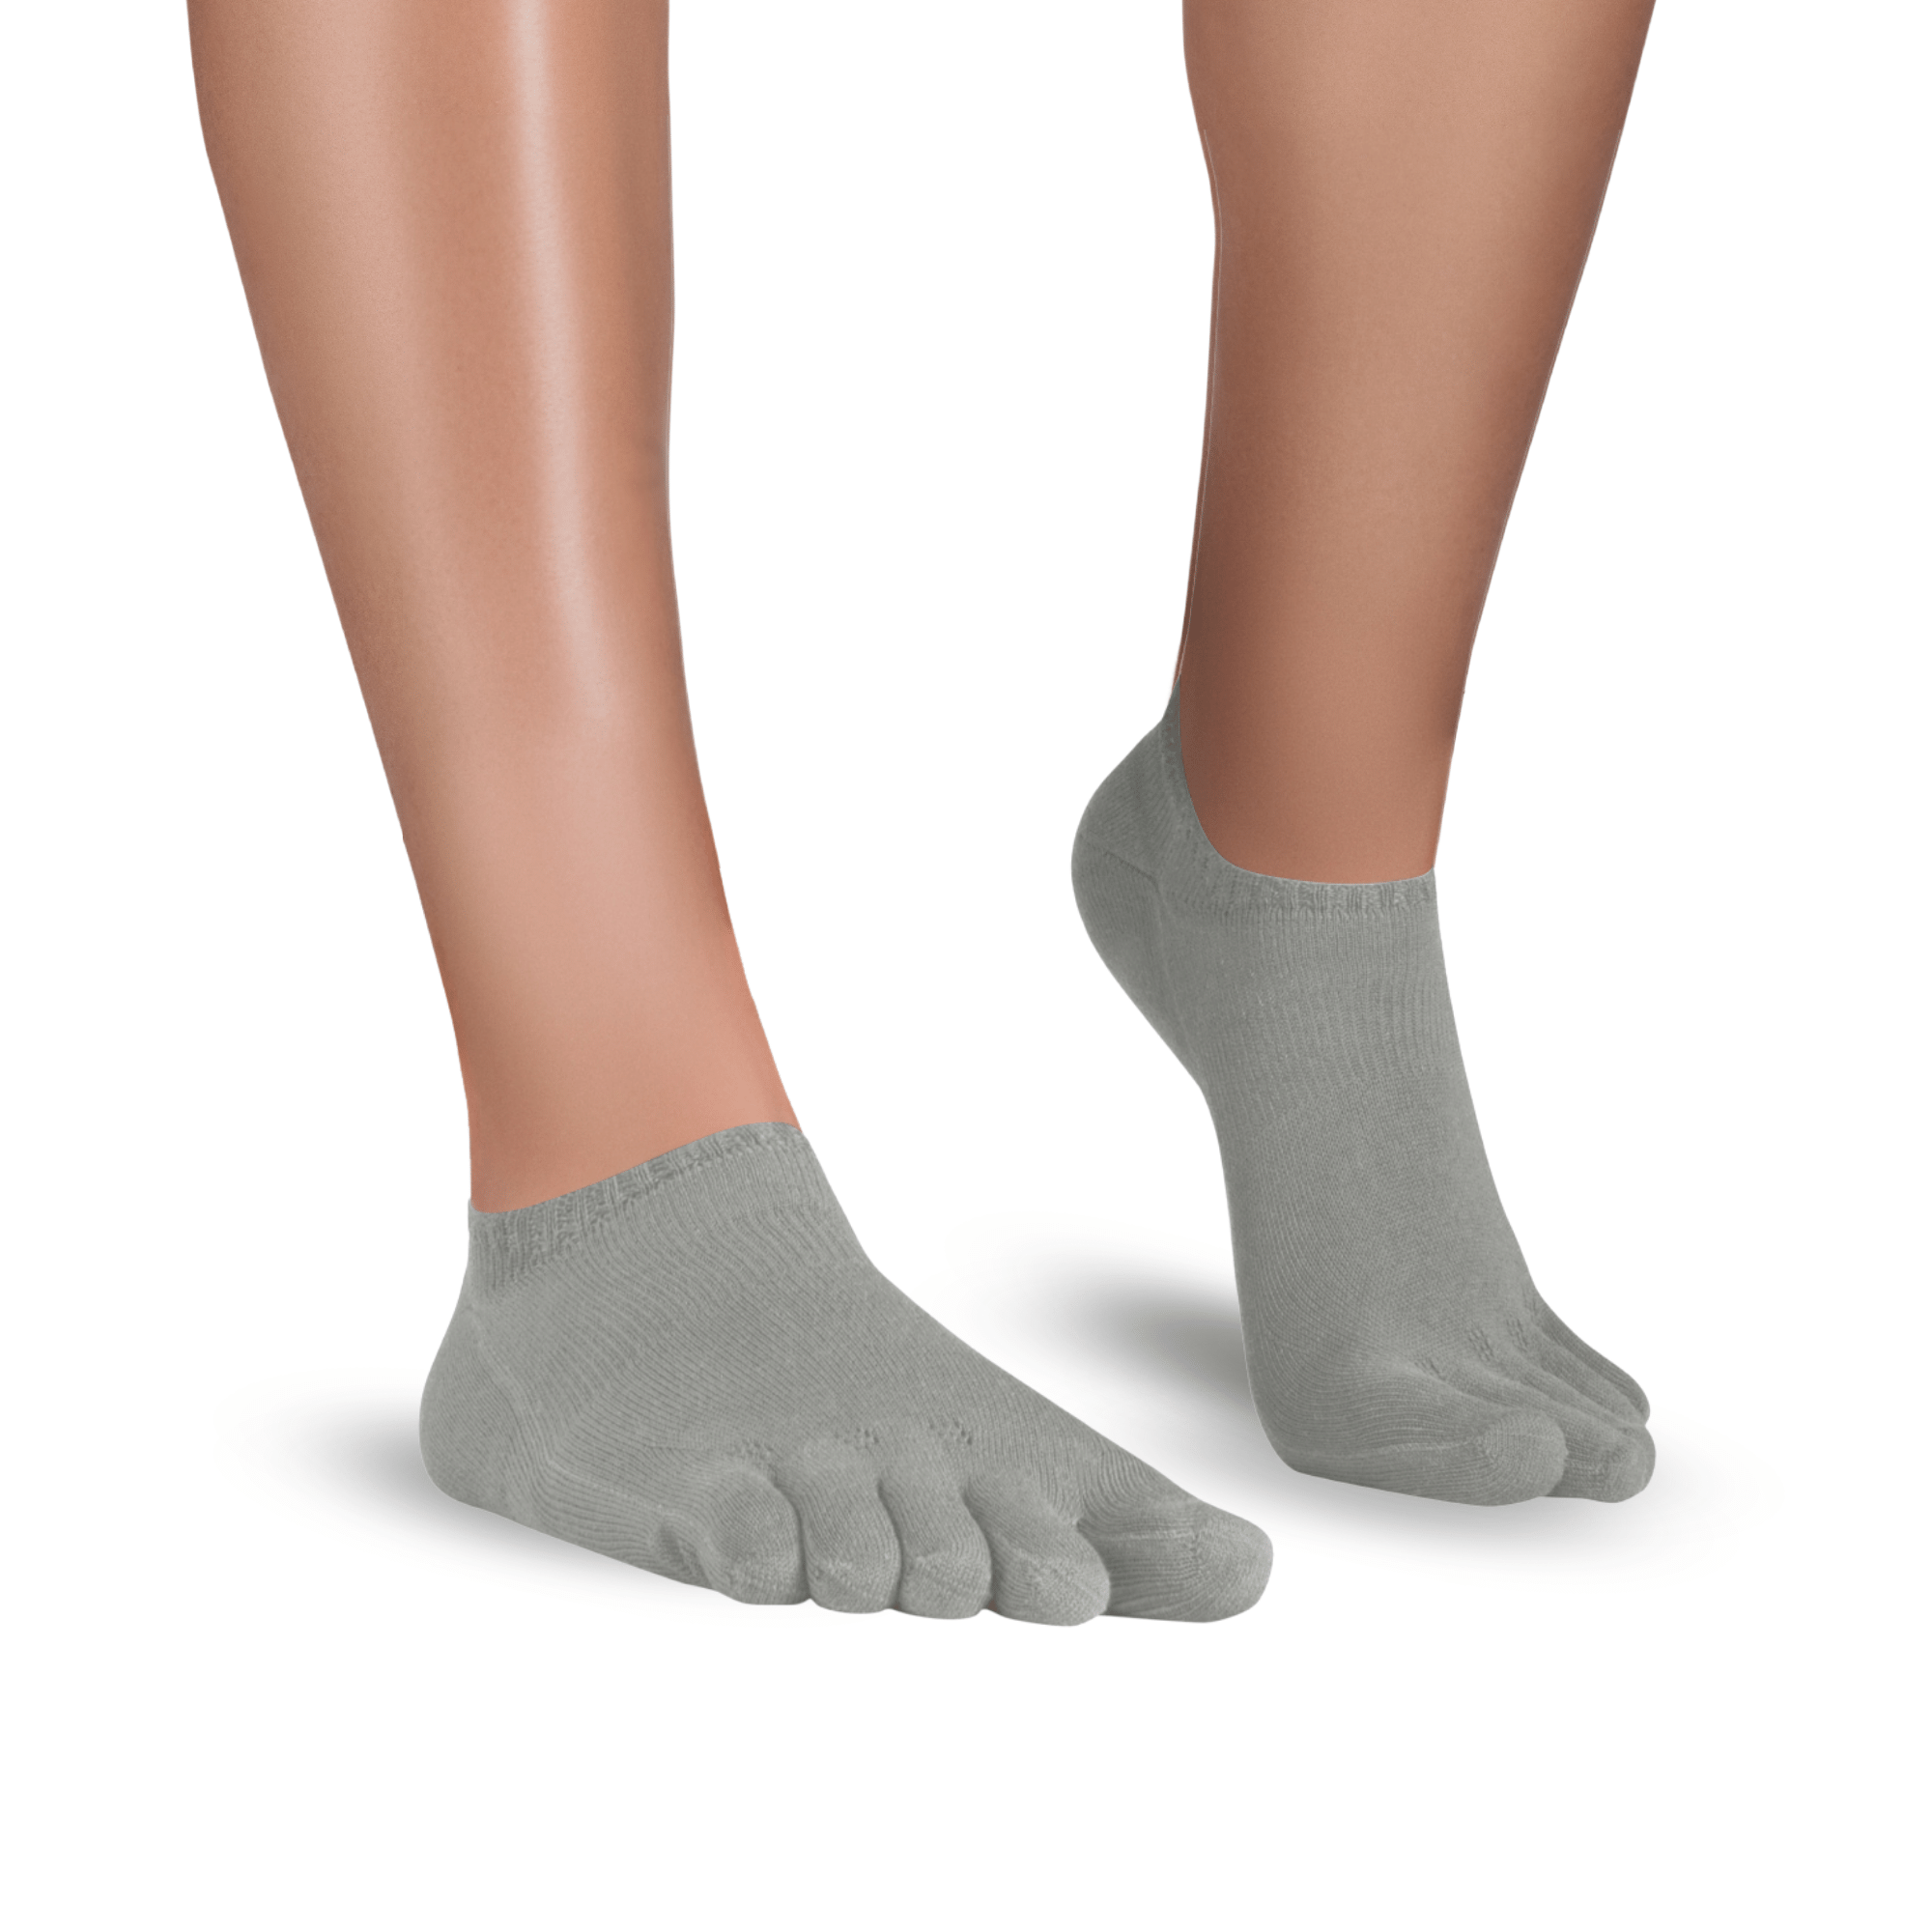 Track and Trail Running Mate Sneaker toe socks no show sports grey